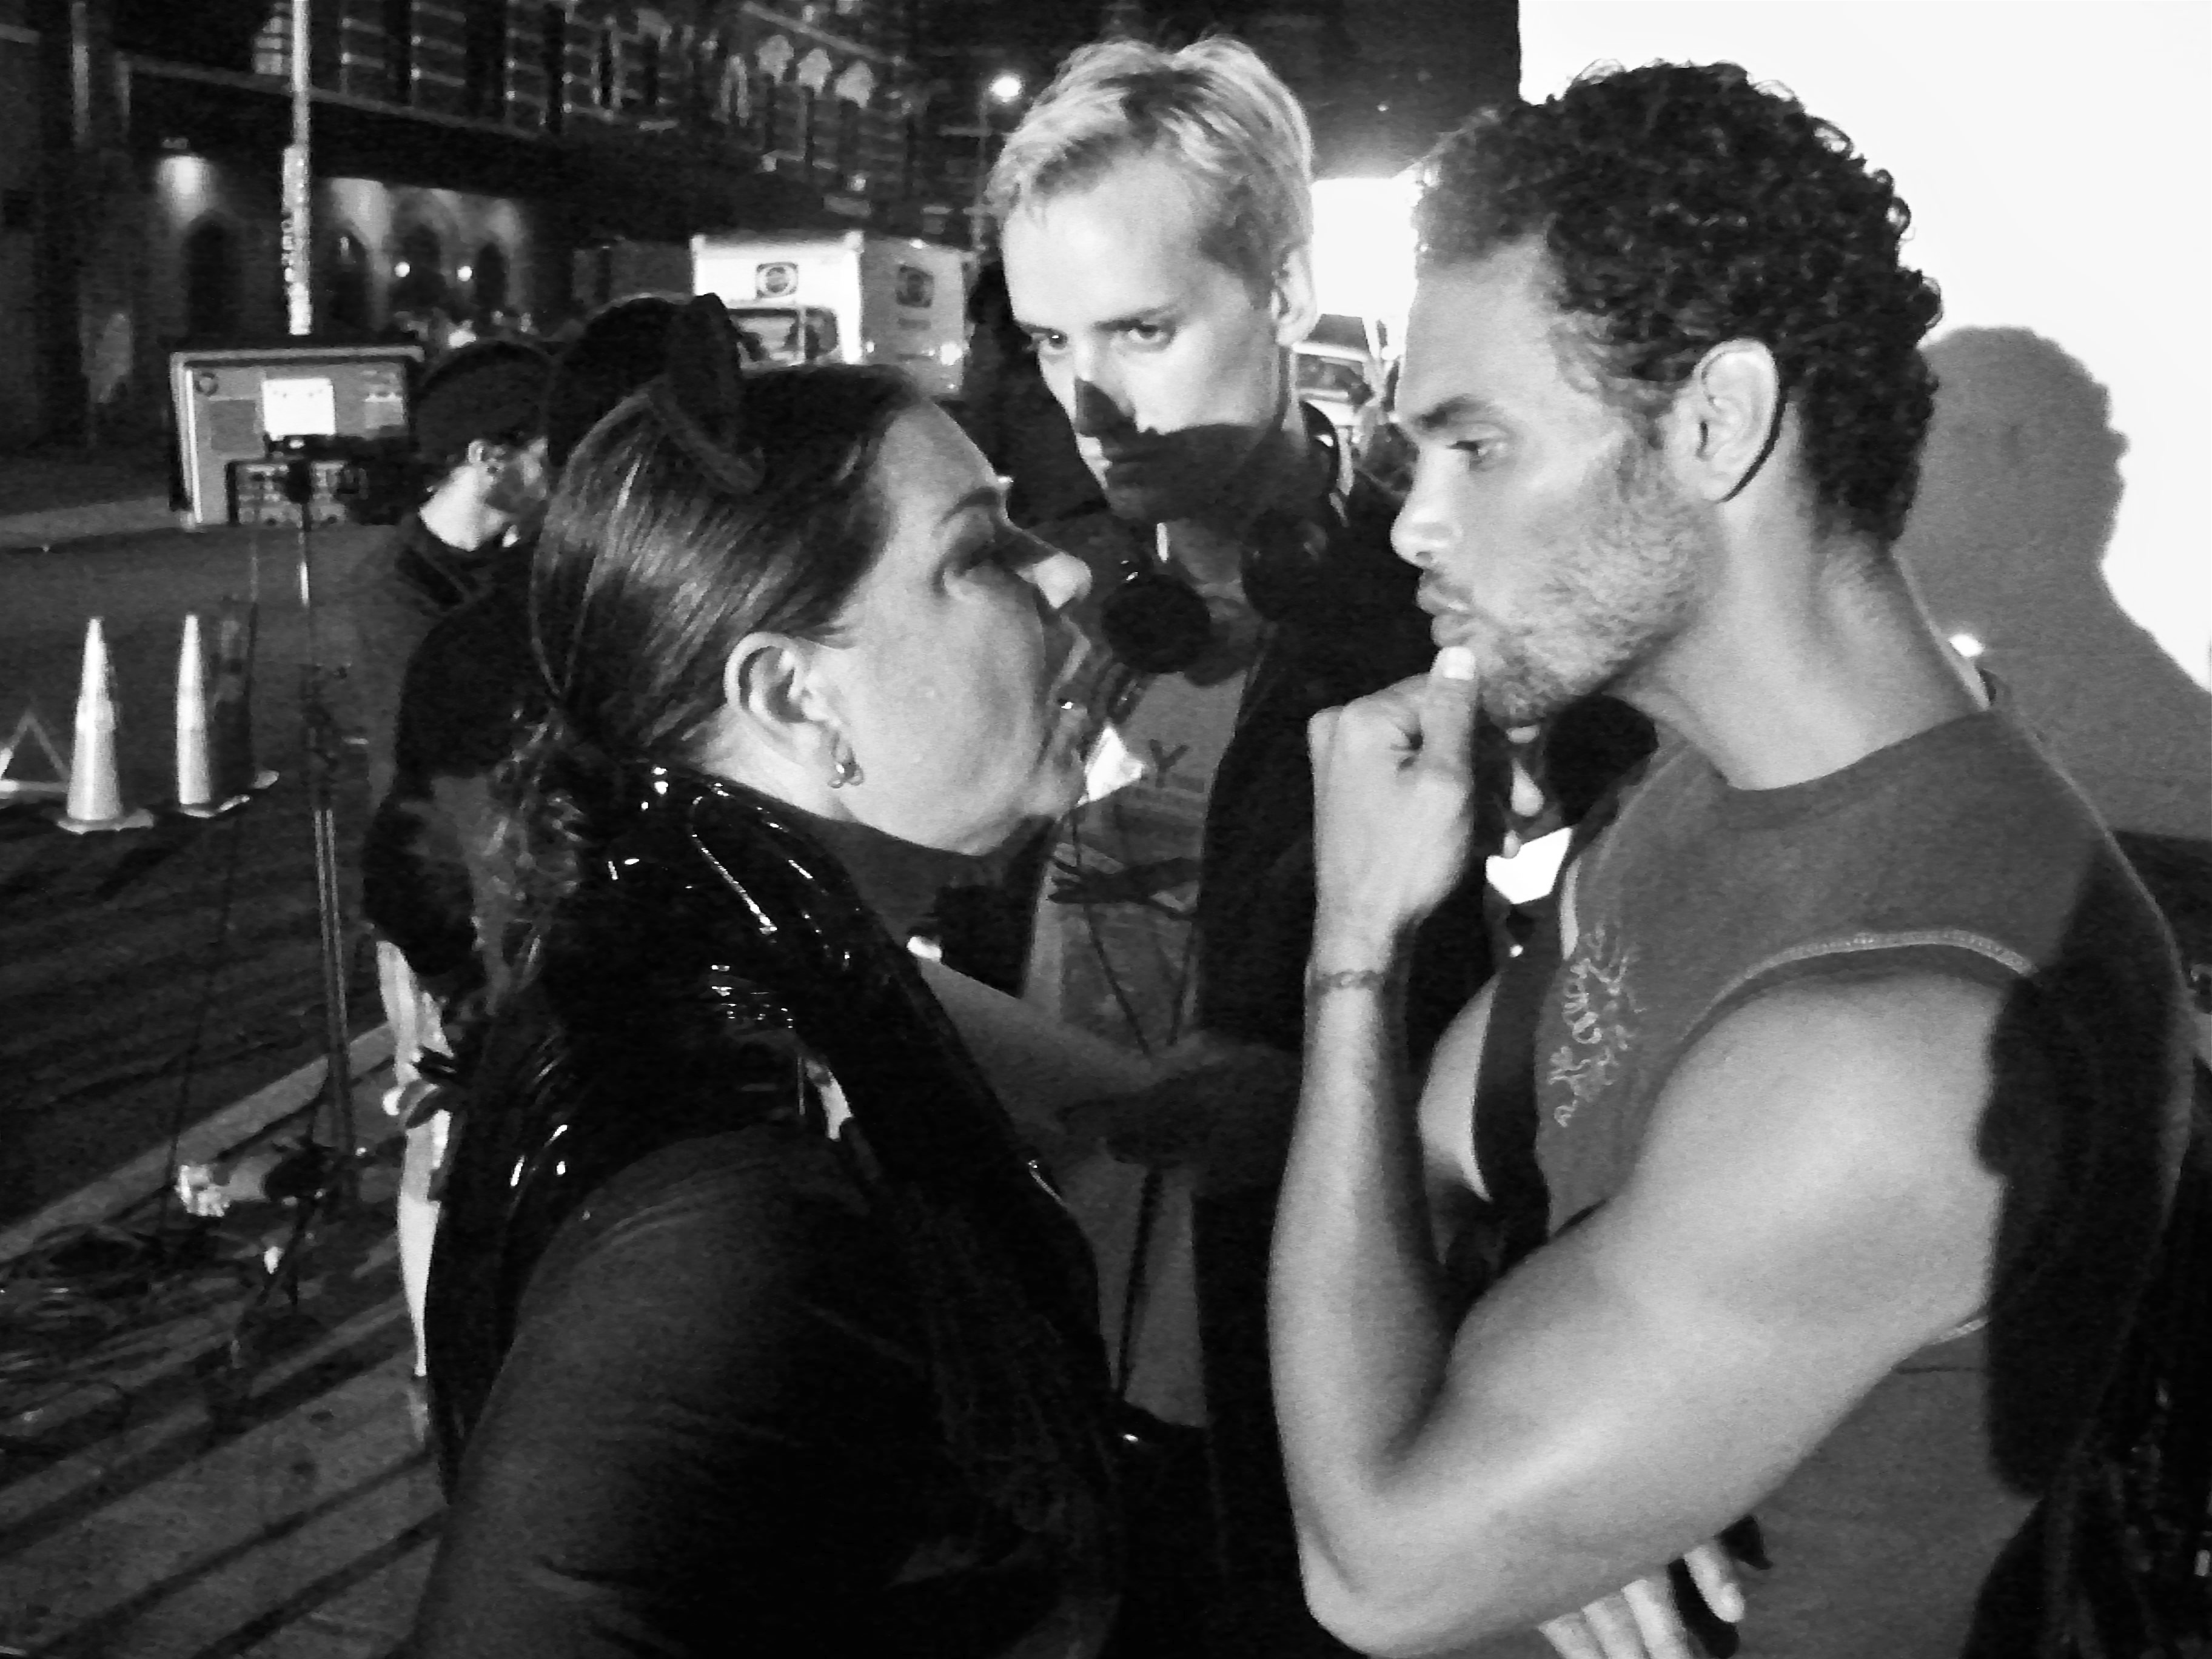 Director Casper Andreas rehearsing with Mindy Cohn (Violet) and Marcus Patrick (Zeus) on the set of 